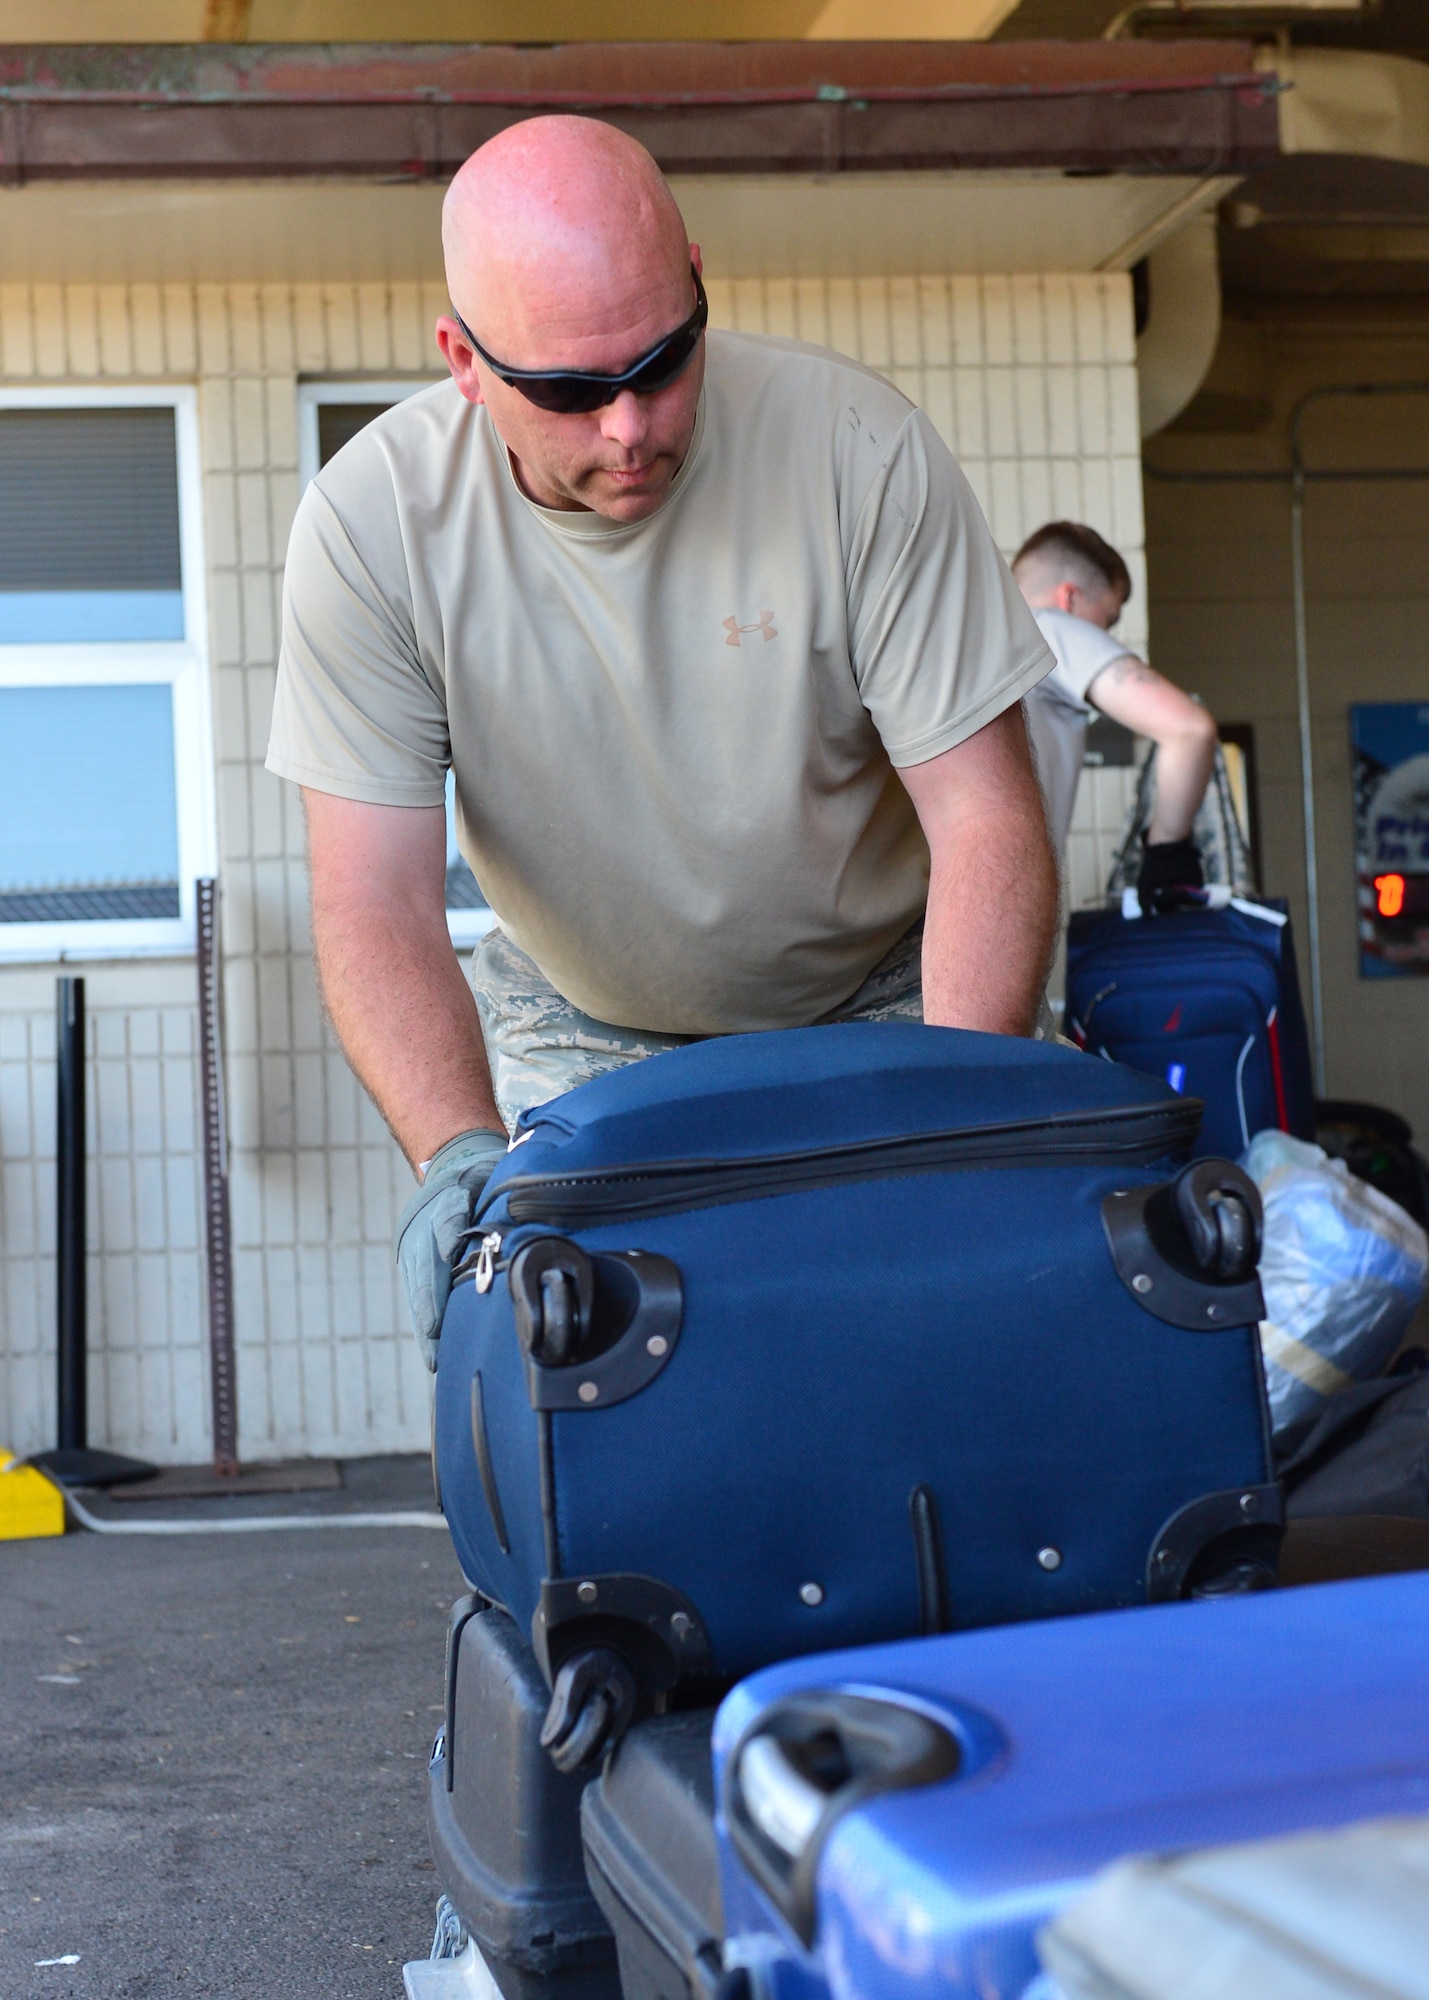 Tech. Sgt. Stevan Hunlick, an Air Force Reservist from the 32nd Aerial Port Squadron, Pittsburgh Air Reserve Station, moves luggage onto a pallet to be loaded on an aircraft on Joint Base Pearl Harbor-Hickam, April 14, 2016. Approximately 30 Airmen from the 32nd APS traveled to JBPHH to conduct annual training hosted by the Airmen of the 735th Air Mobility Squadron. (U.S. Air Force photo by Tech. Sgt. Aaron Oelrich)